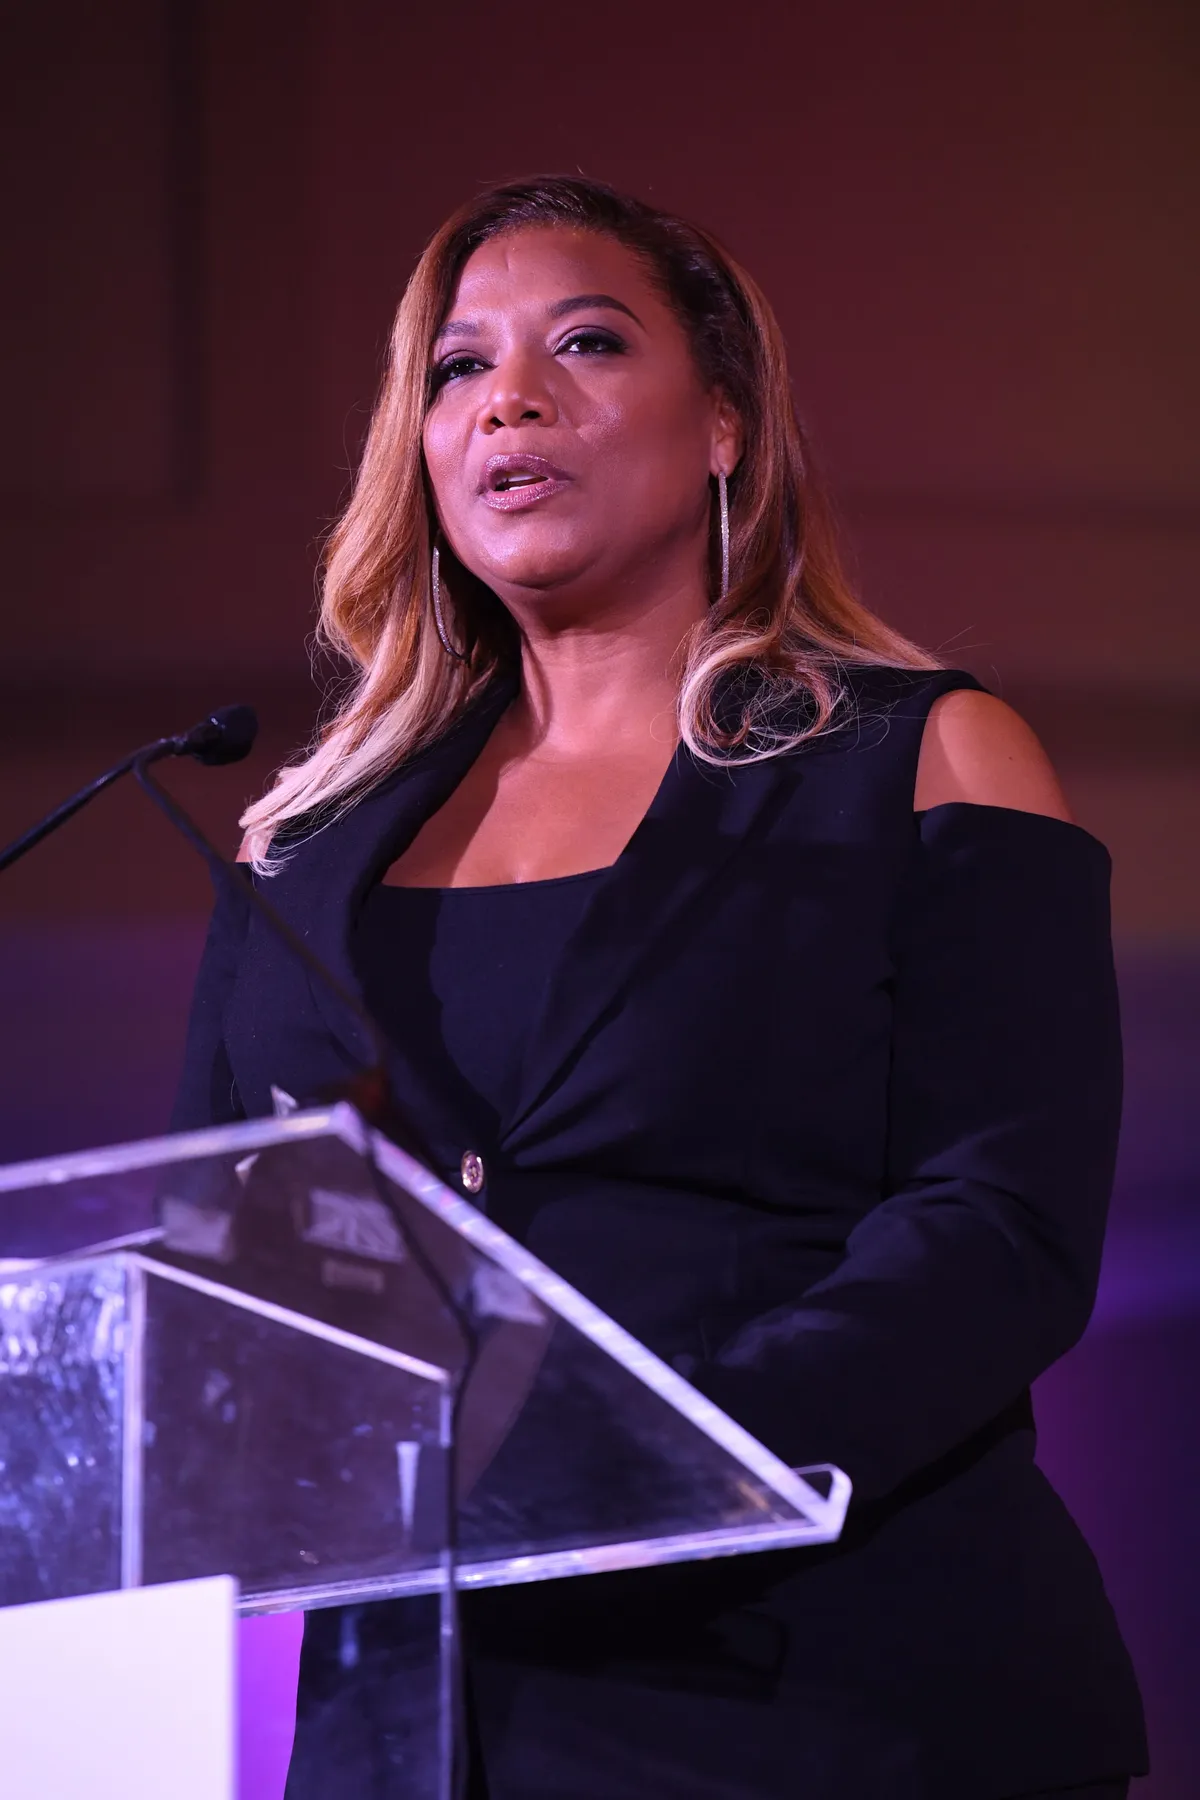 Queen Latifah speaking onstage at the 2017 BronzeLens Film Festival in Atlanta, Georgia. | Photo: Getty Images